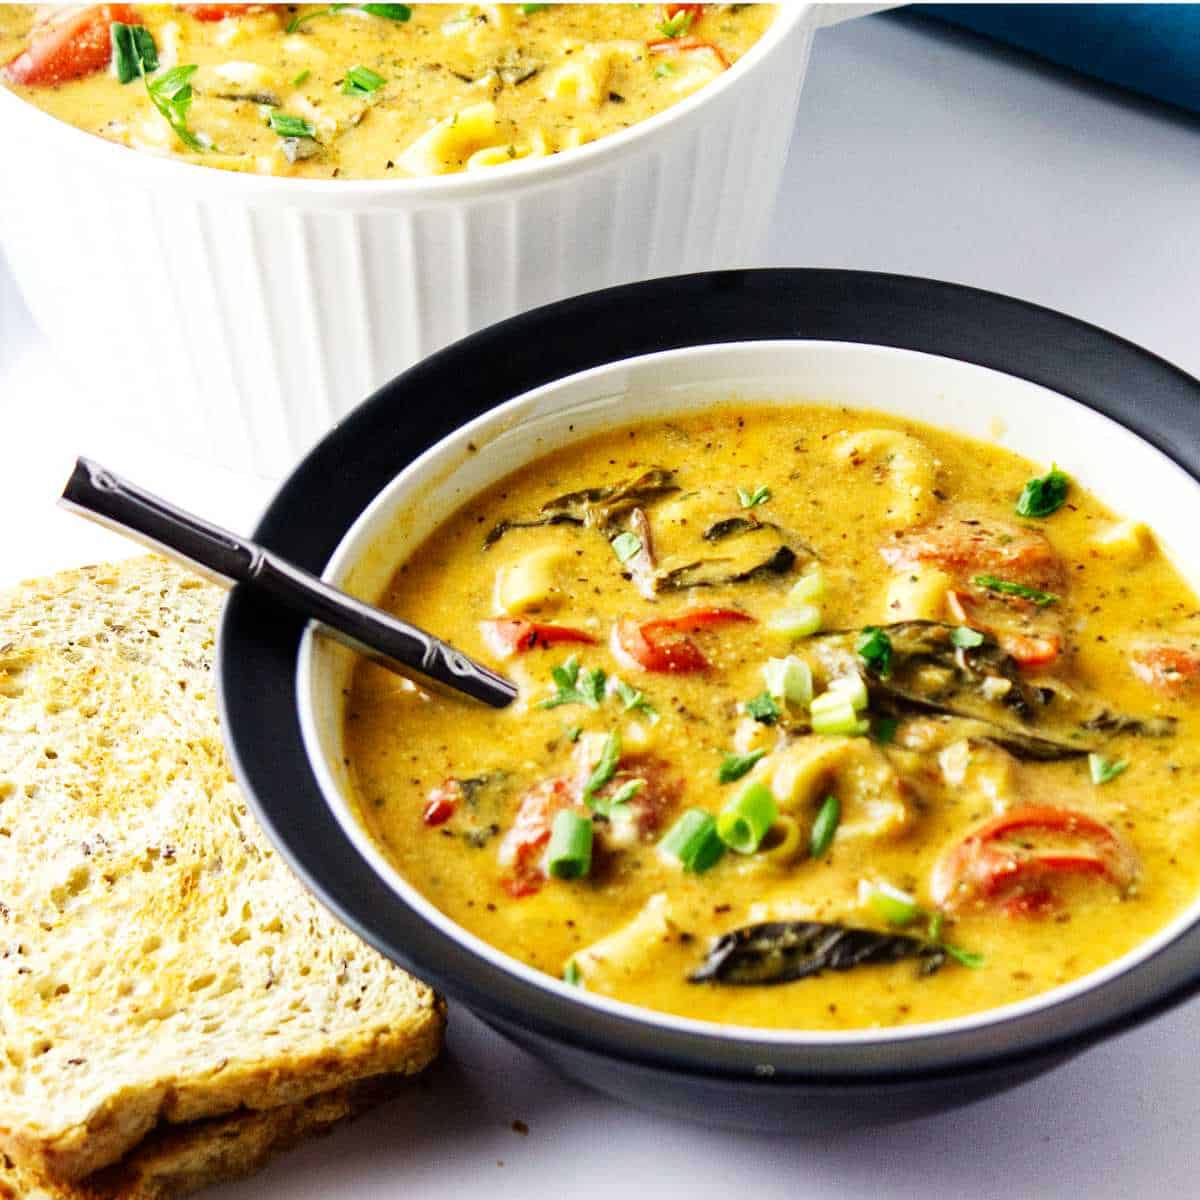 Instant pot tortellini soup in a bowl with toasted bread nearby.